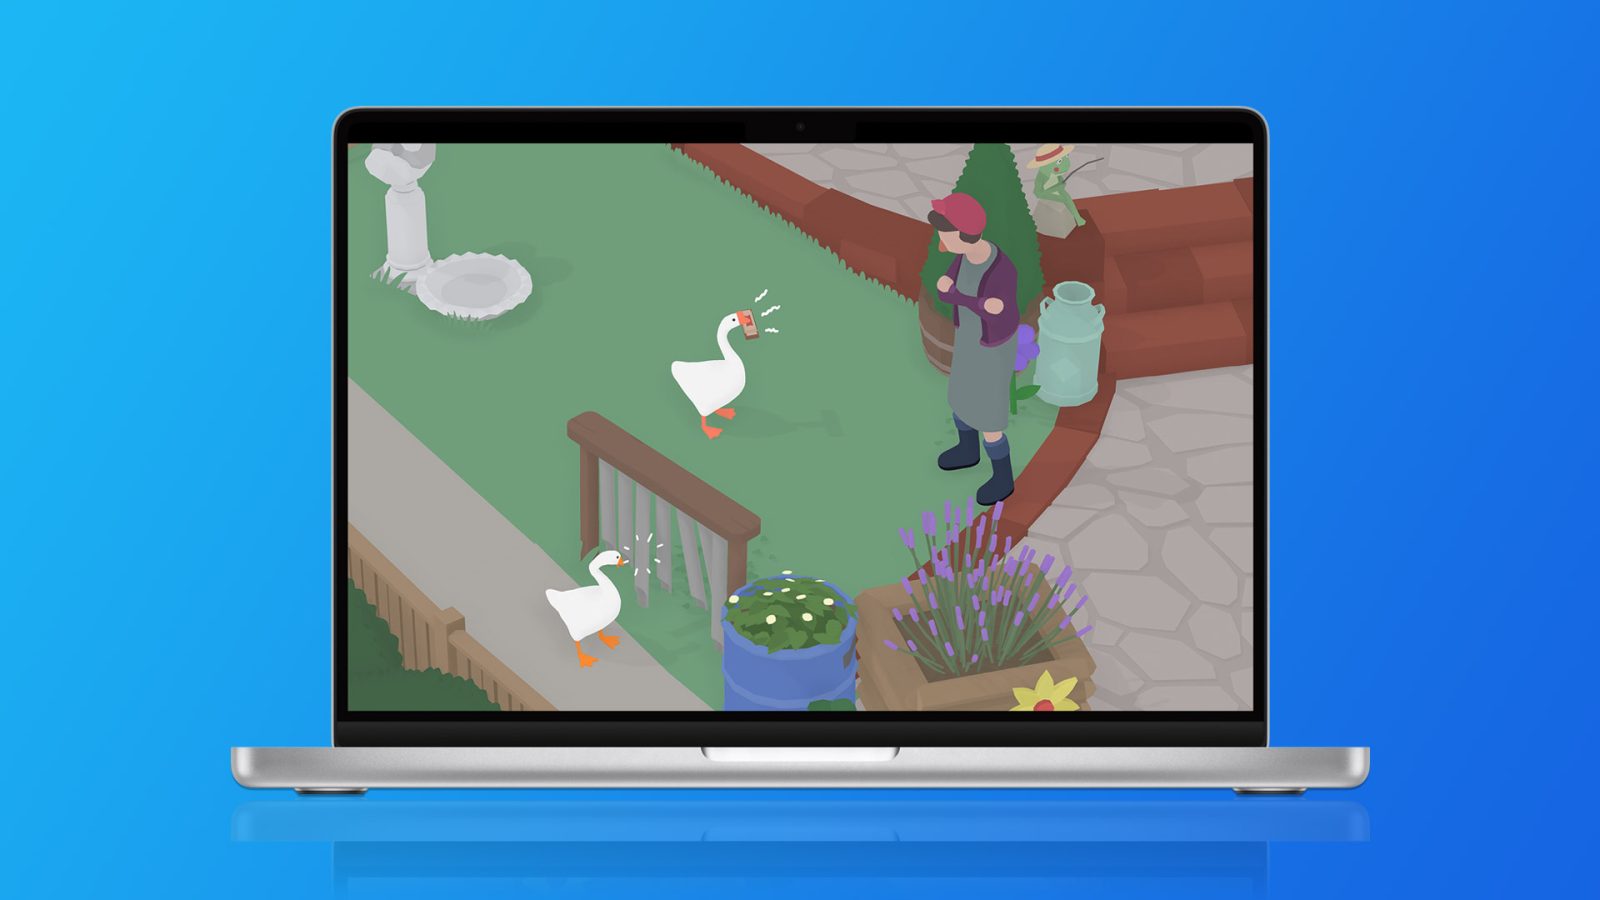 Popular 'Untitled Goose Game' for macOS rejected twice by Apple's Mac App Store